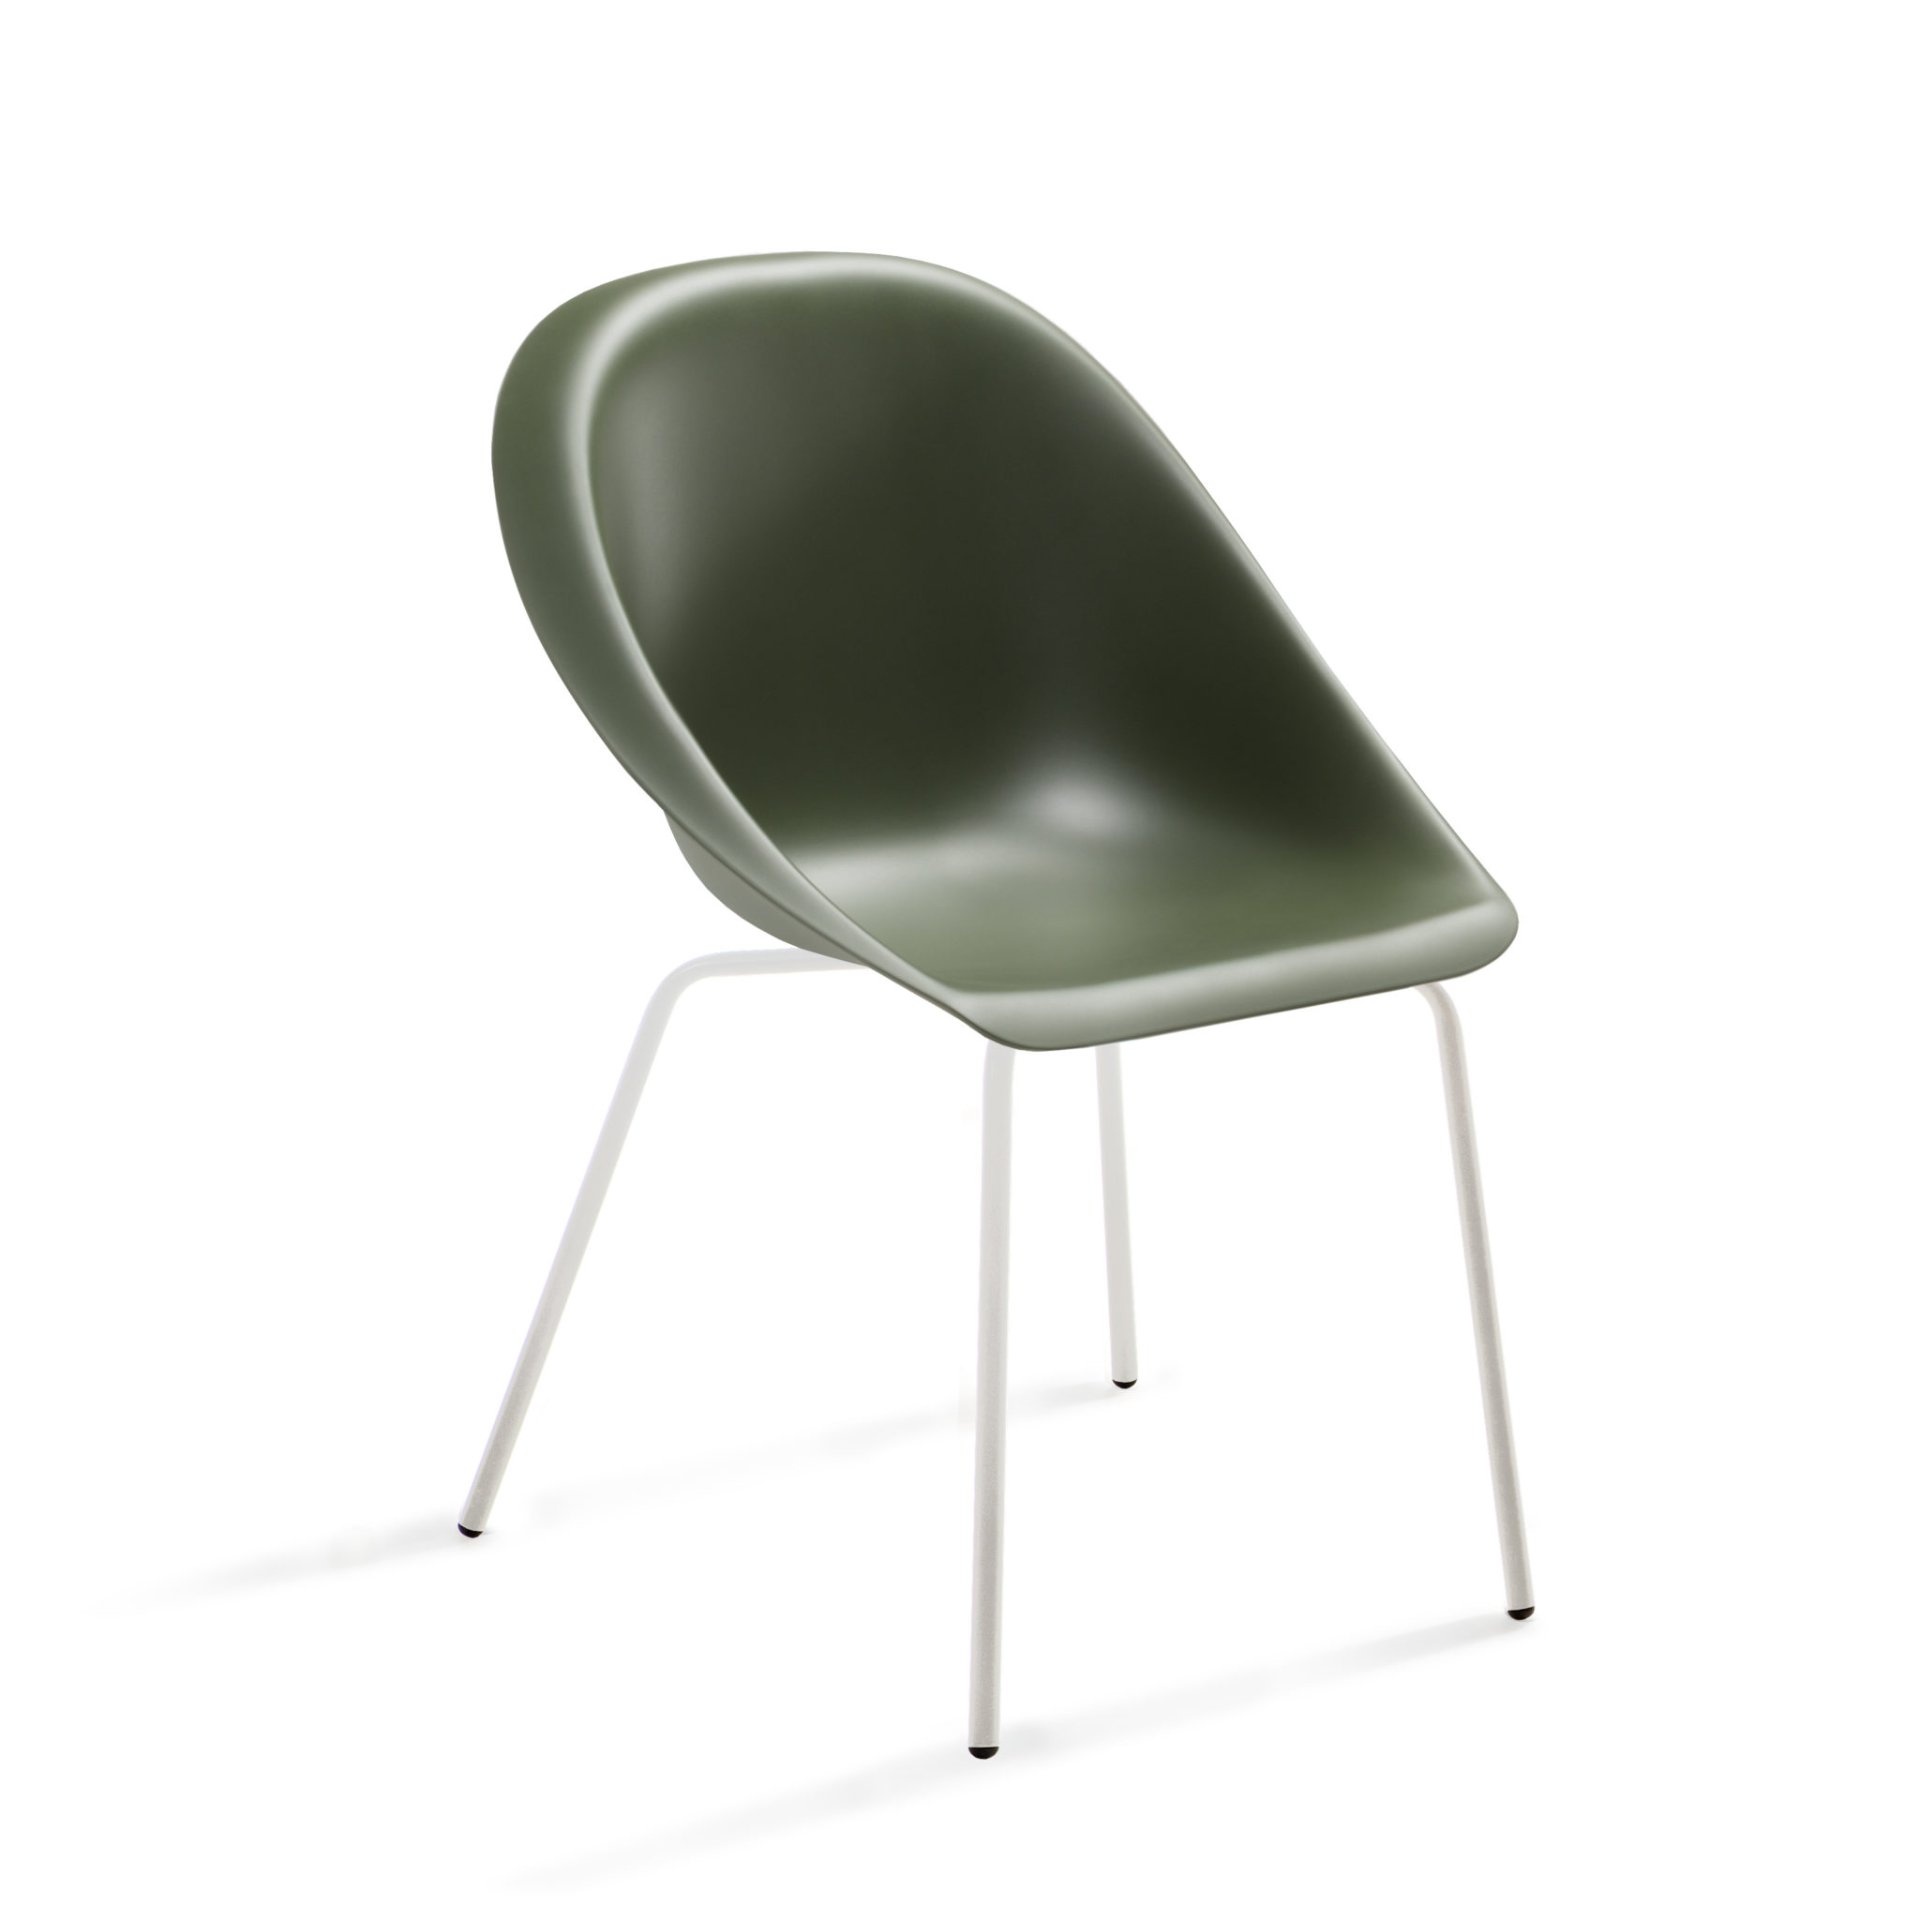 white structure - olive green seat